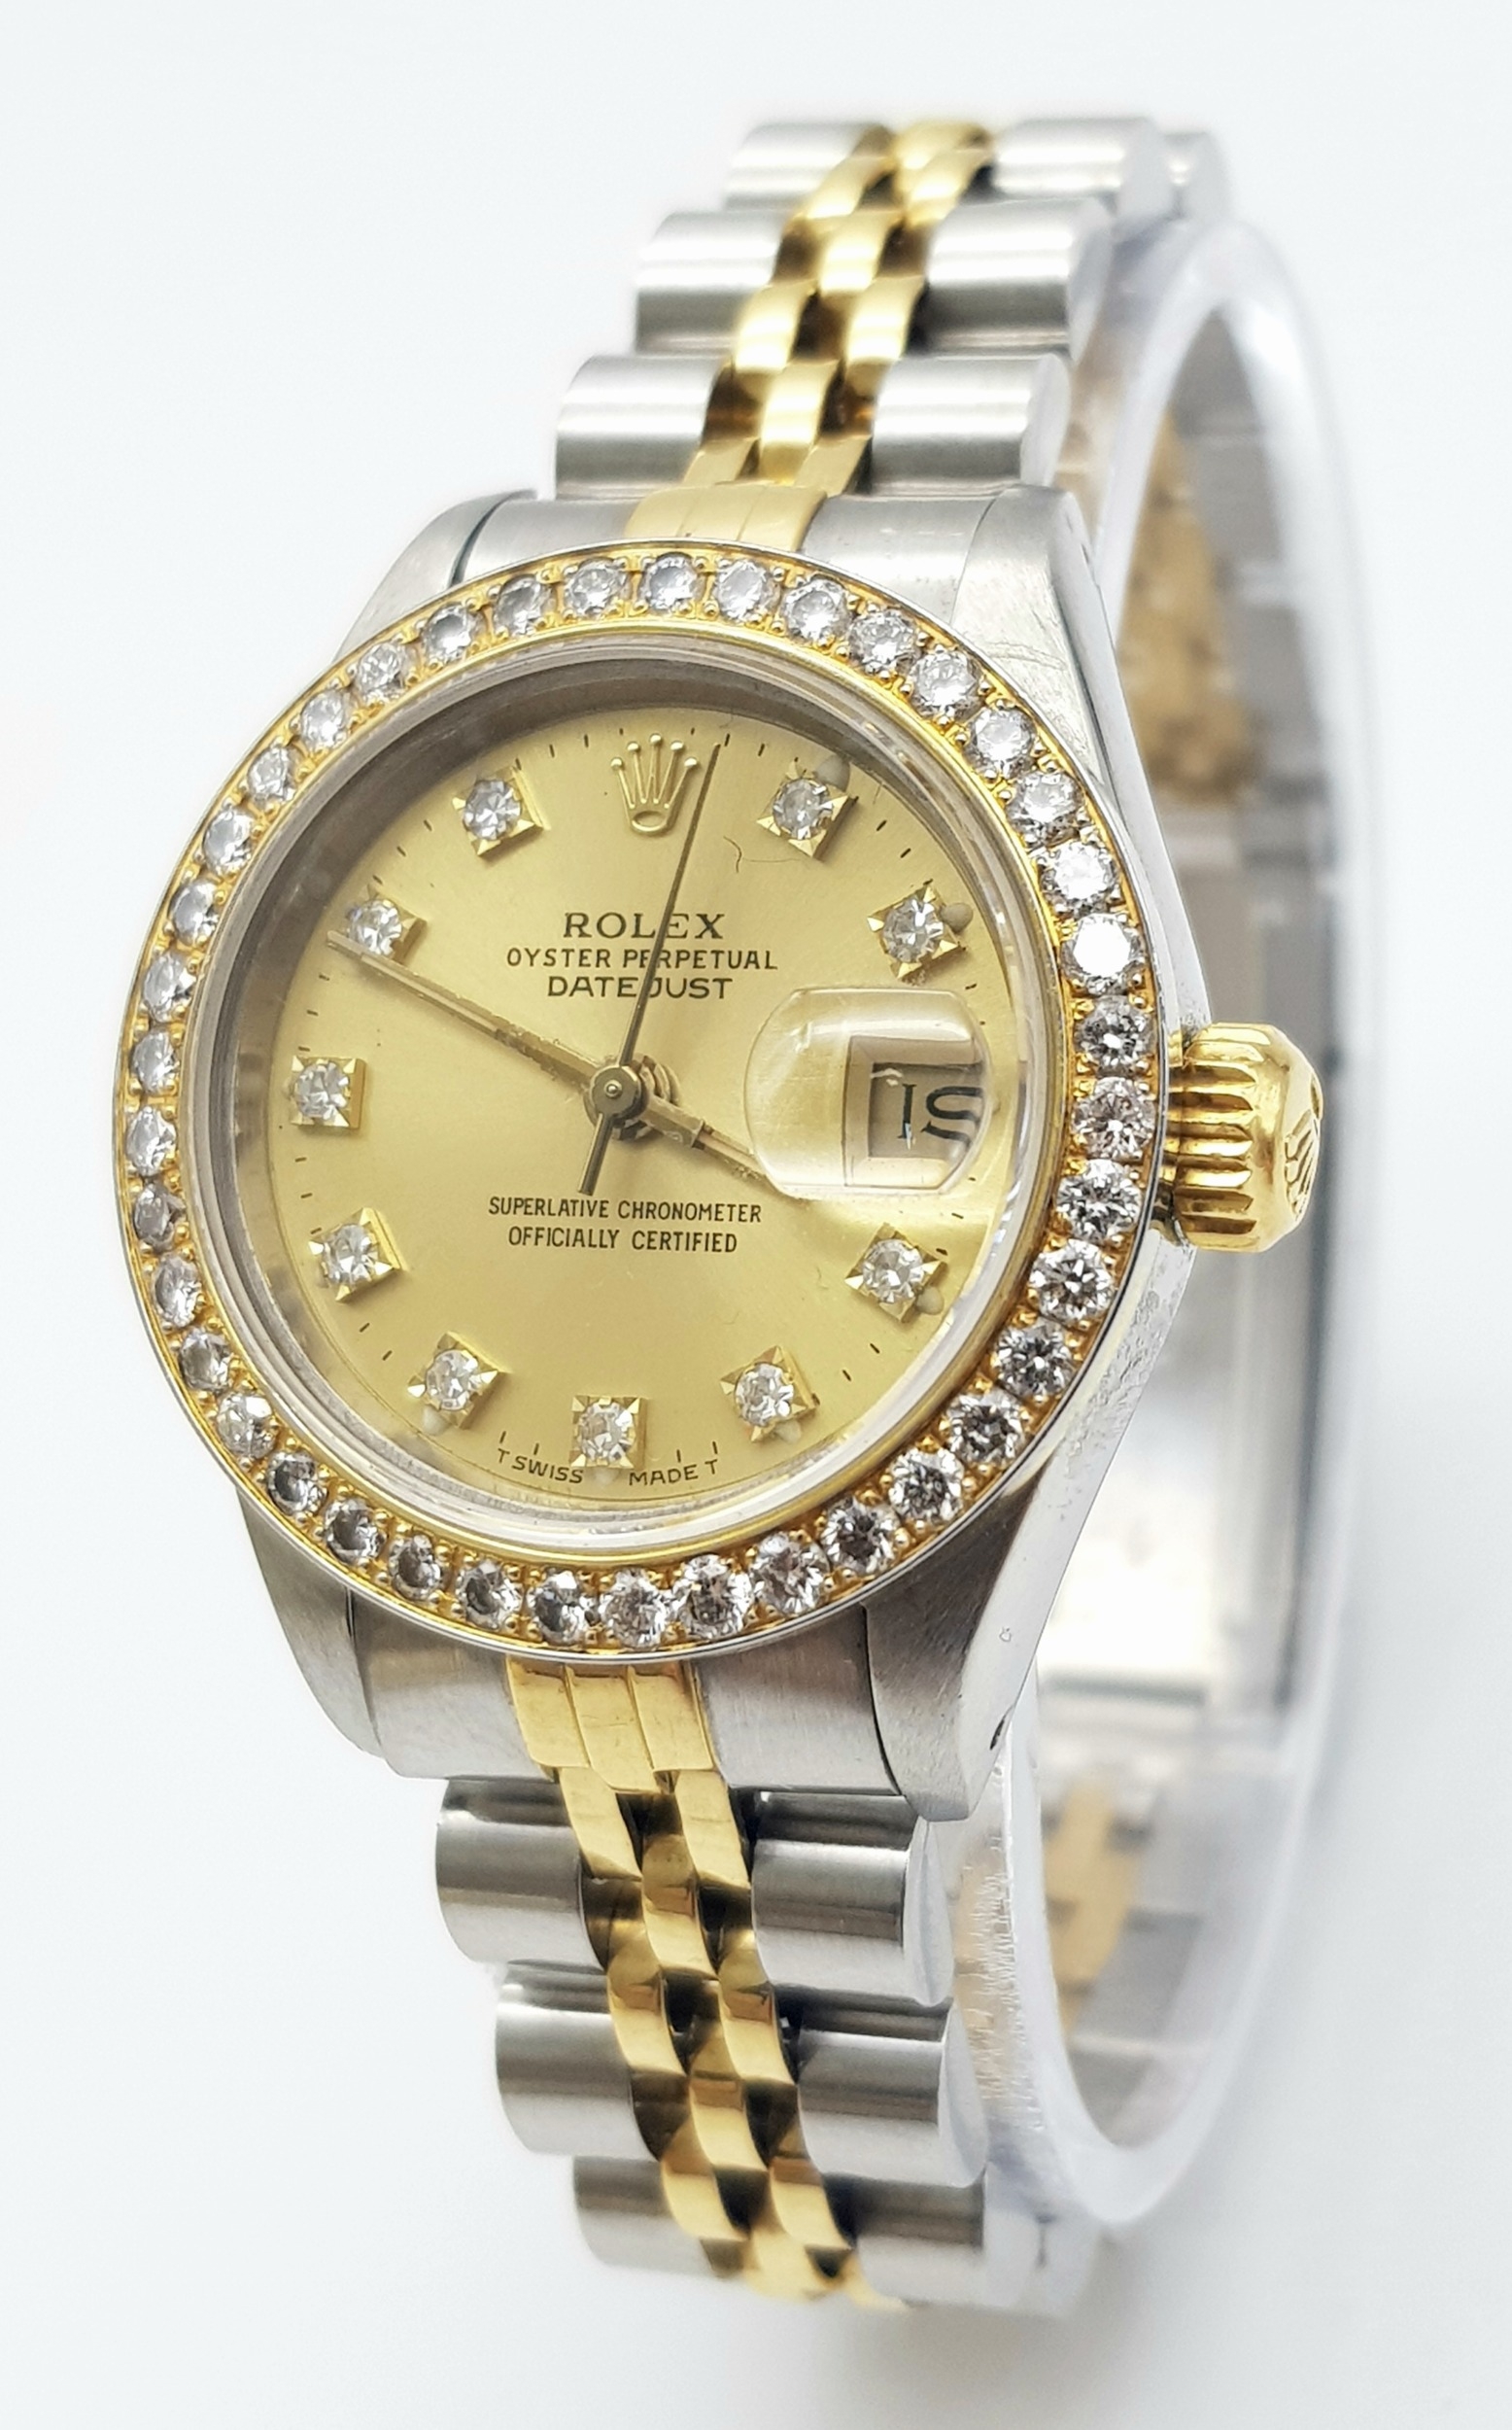 THE CLASSIC LADIES ROLEX BI-METAL OYSTER PERPETUAL DATEJUST WATCH IN VERY GOOD CONDITION HAVING A - Image 2 of 11